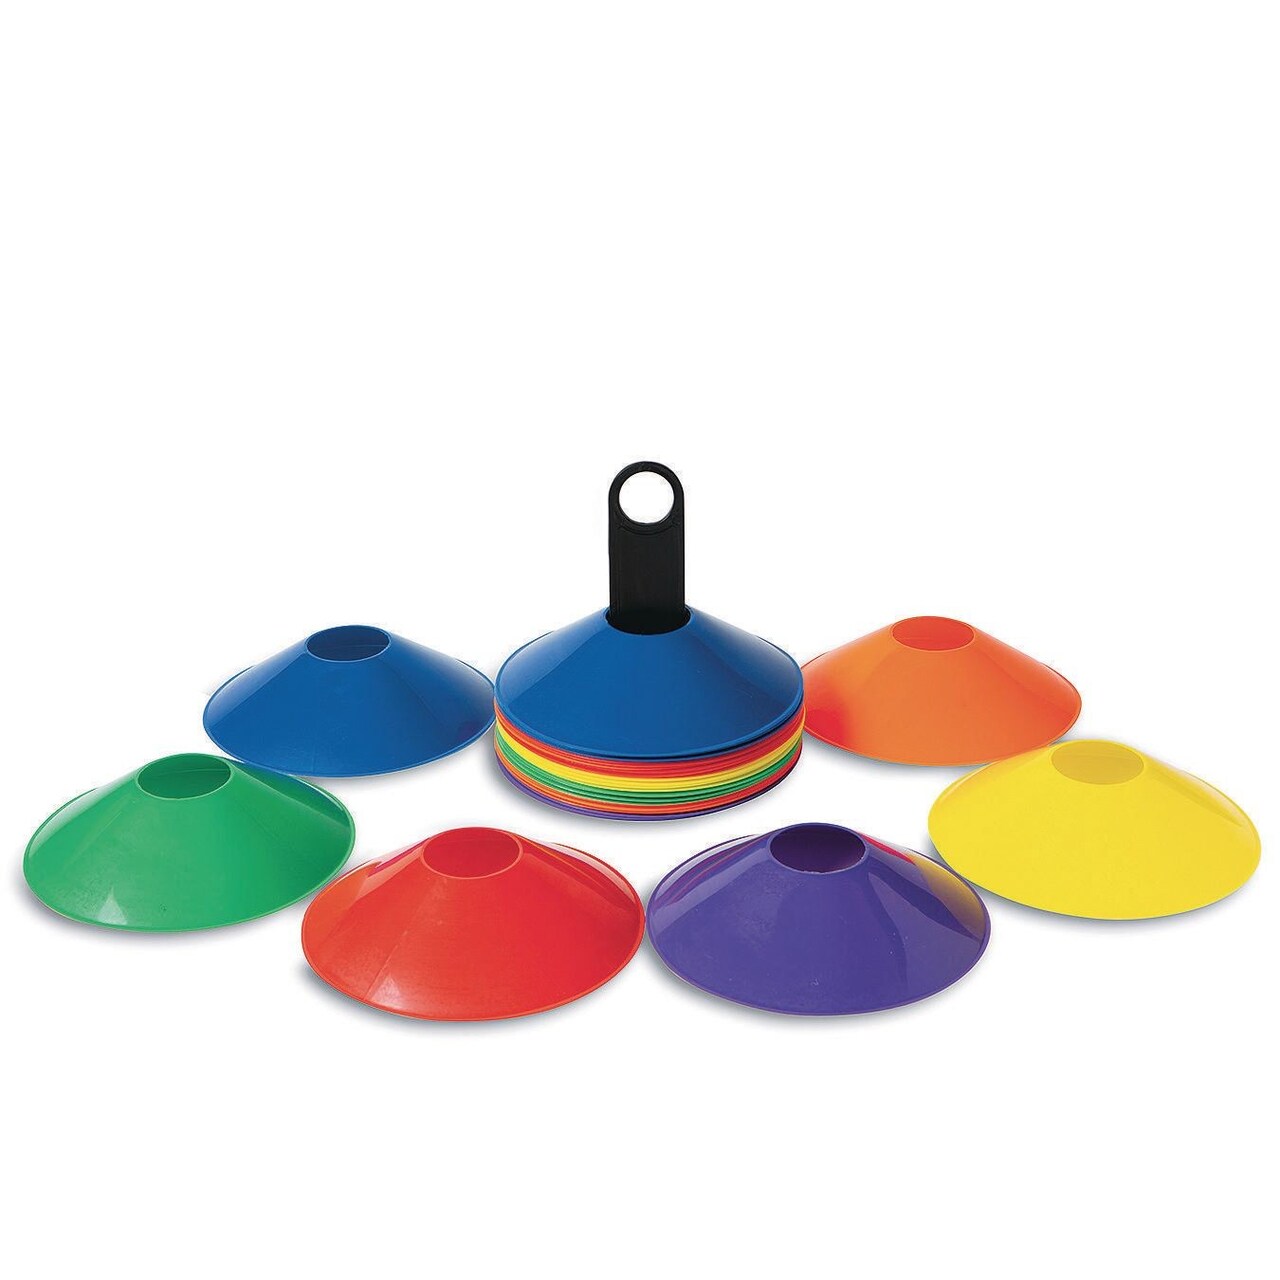 S&#x26;S Worldwide Spectrum, Half Cone Super Set.  Durable and Economical Polyethylene Plastic Cones. 8&#x22; Dia, x 2&#x22;H with 2&#x22; Center Hole. Includes Carry / Storage Holder. 6 Each in 6 Colors. Set of 36.